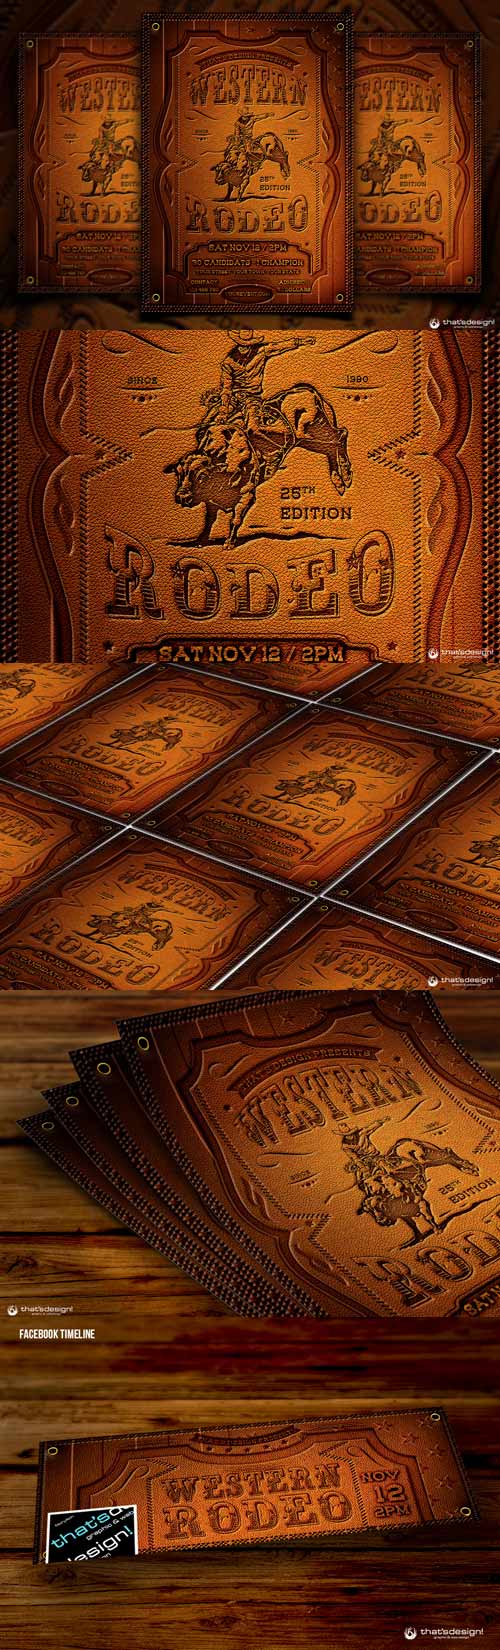 Western Rodeo Flyer Template